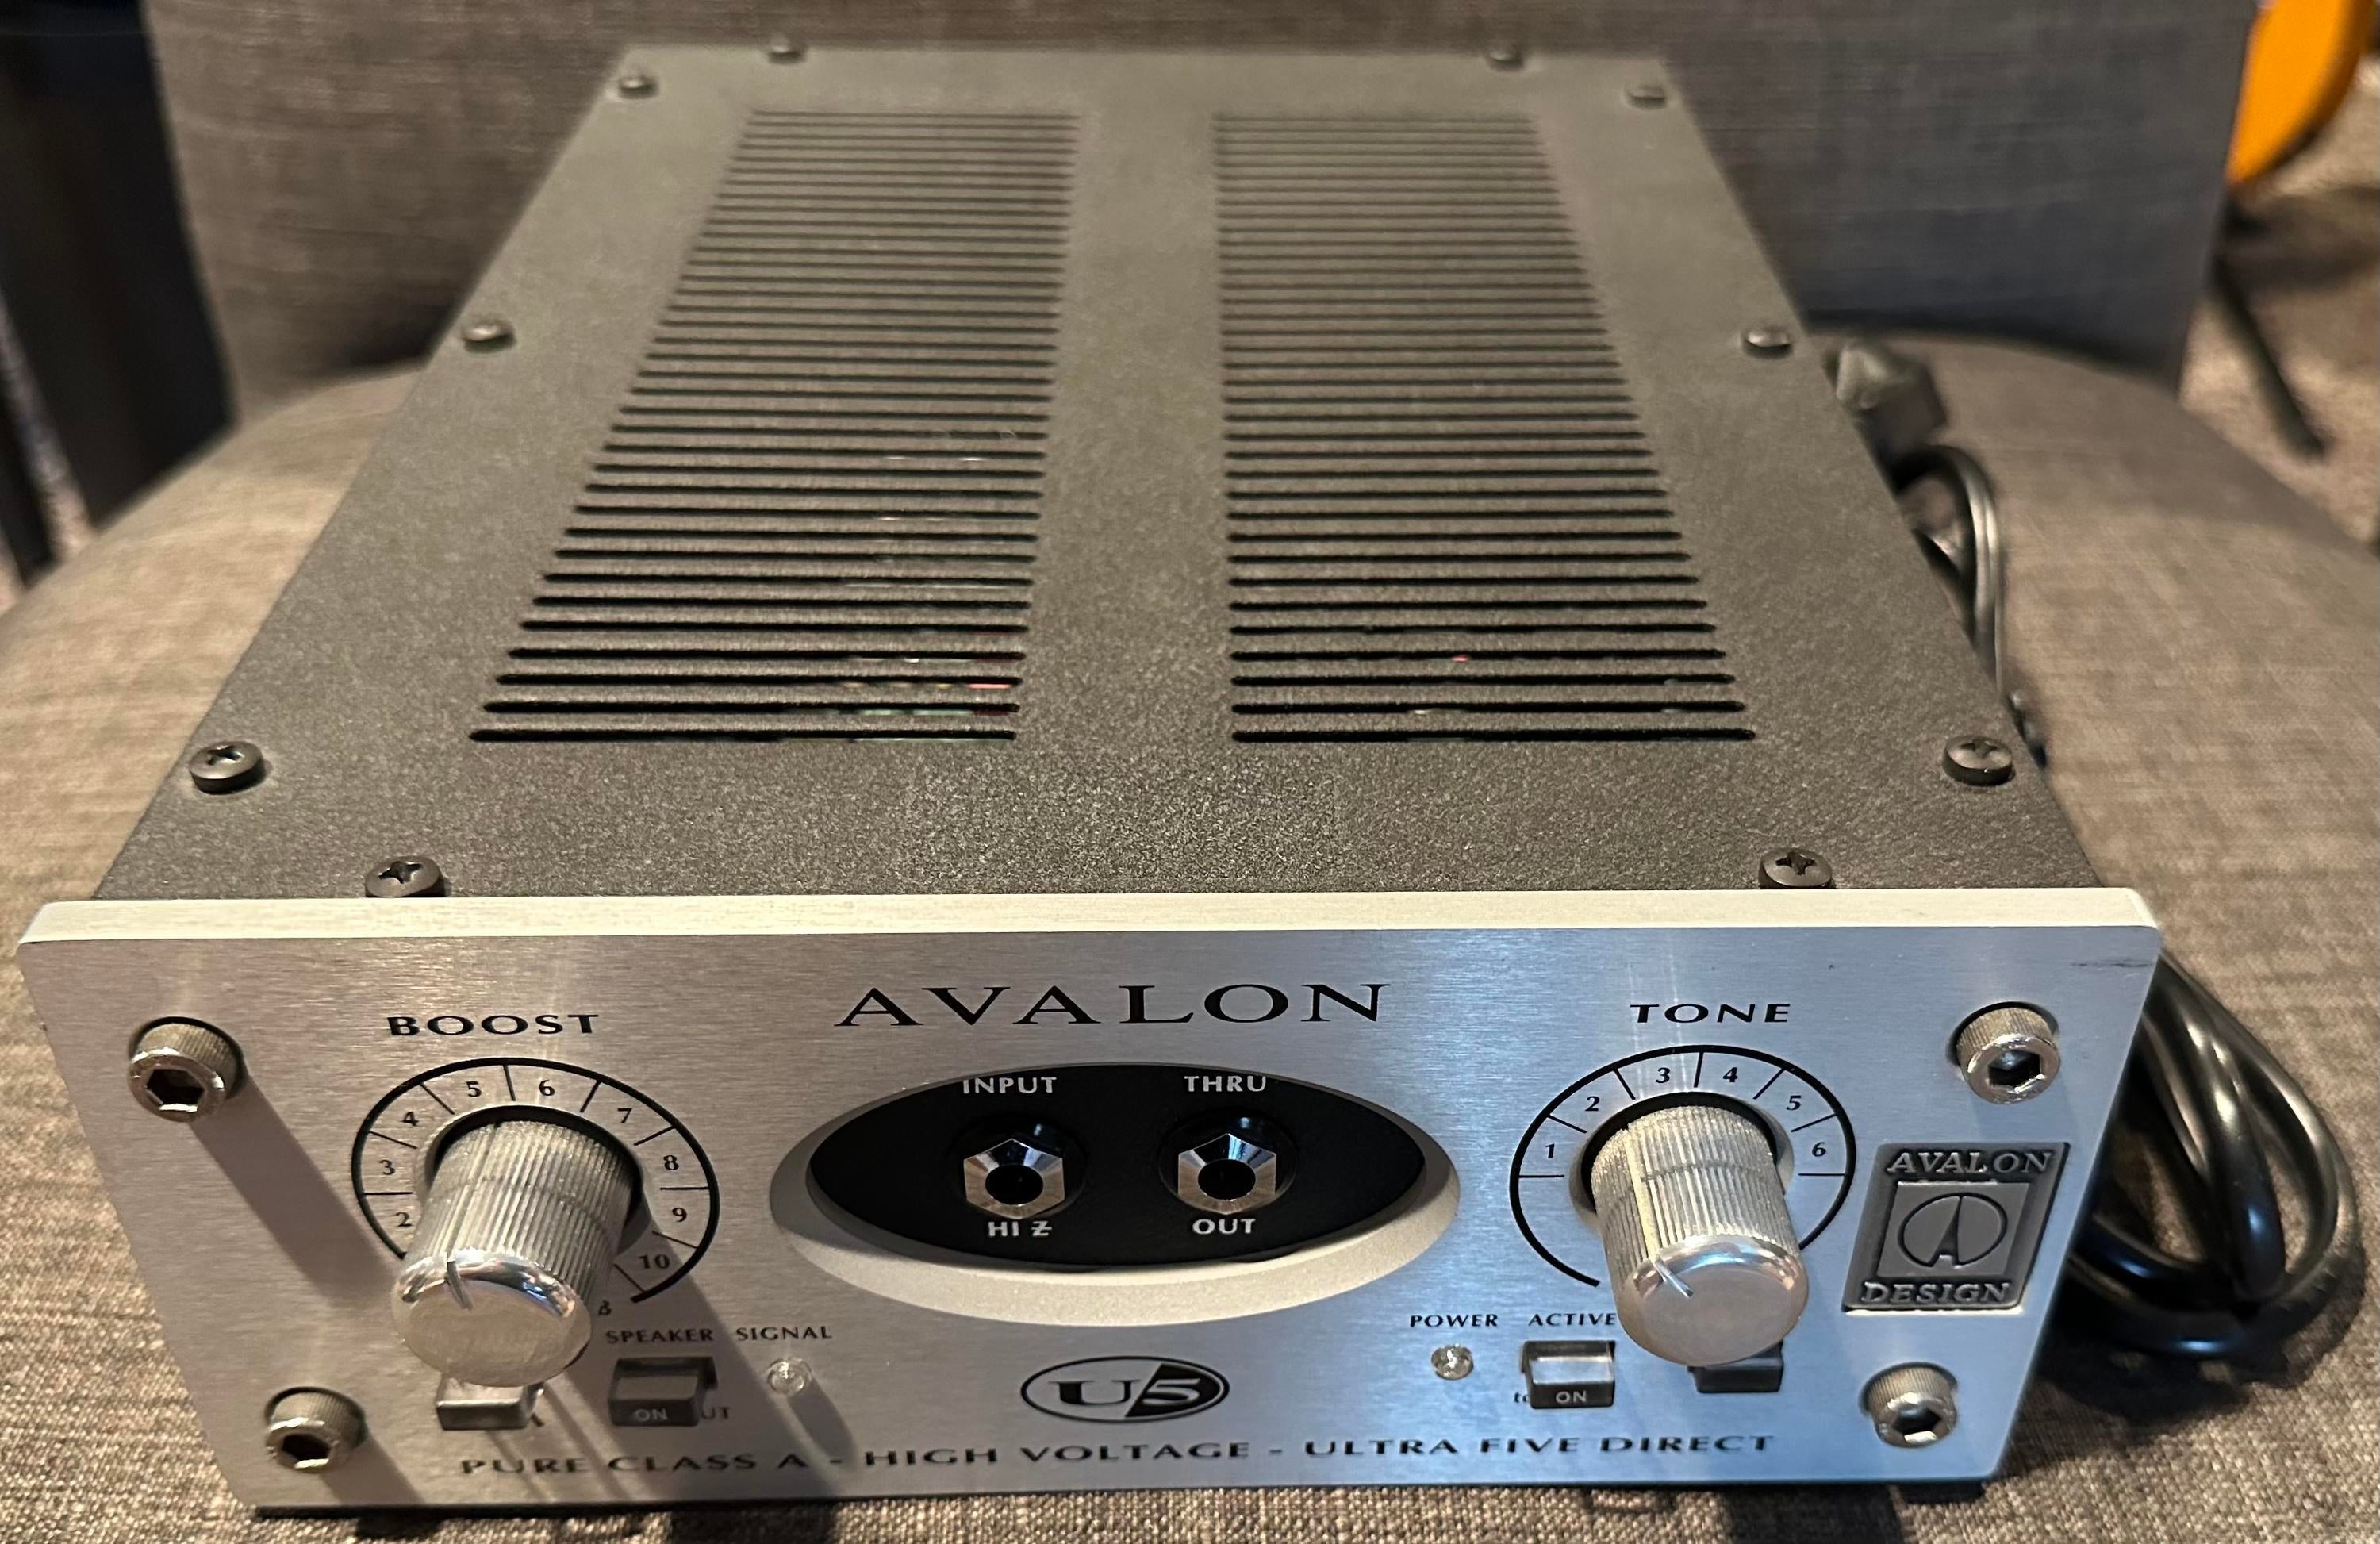 Used Avalon U5 Class A Active Instrument DI - Sweetwater's Gear